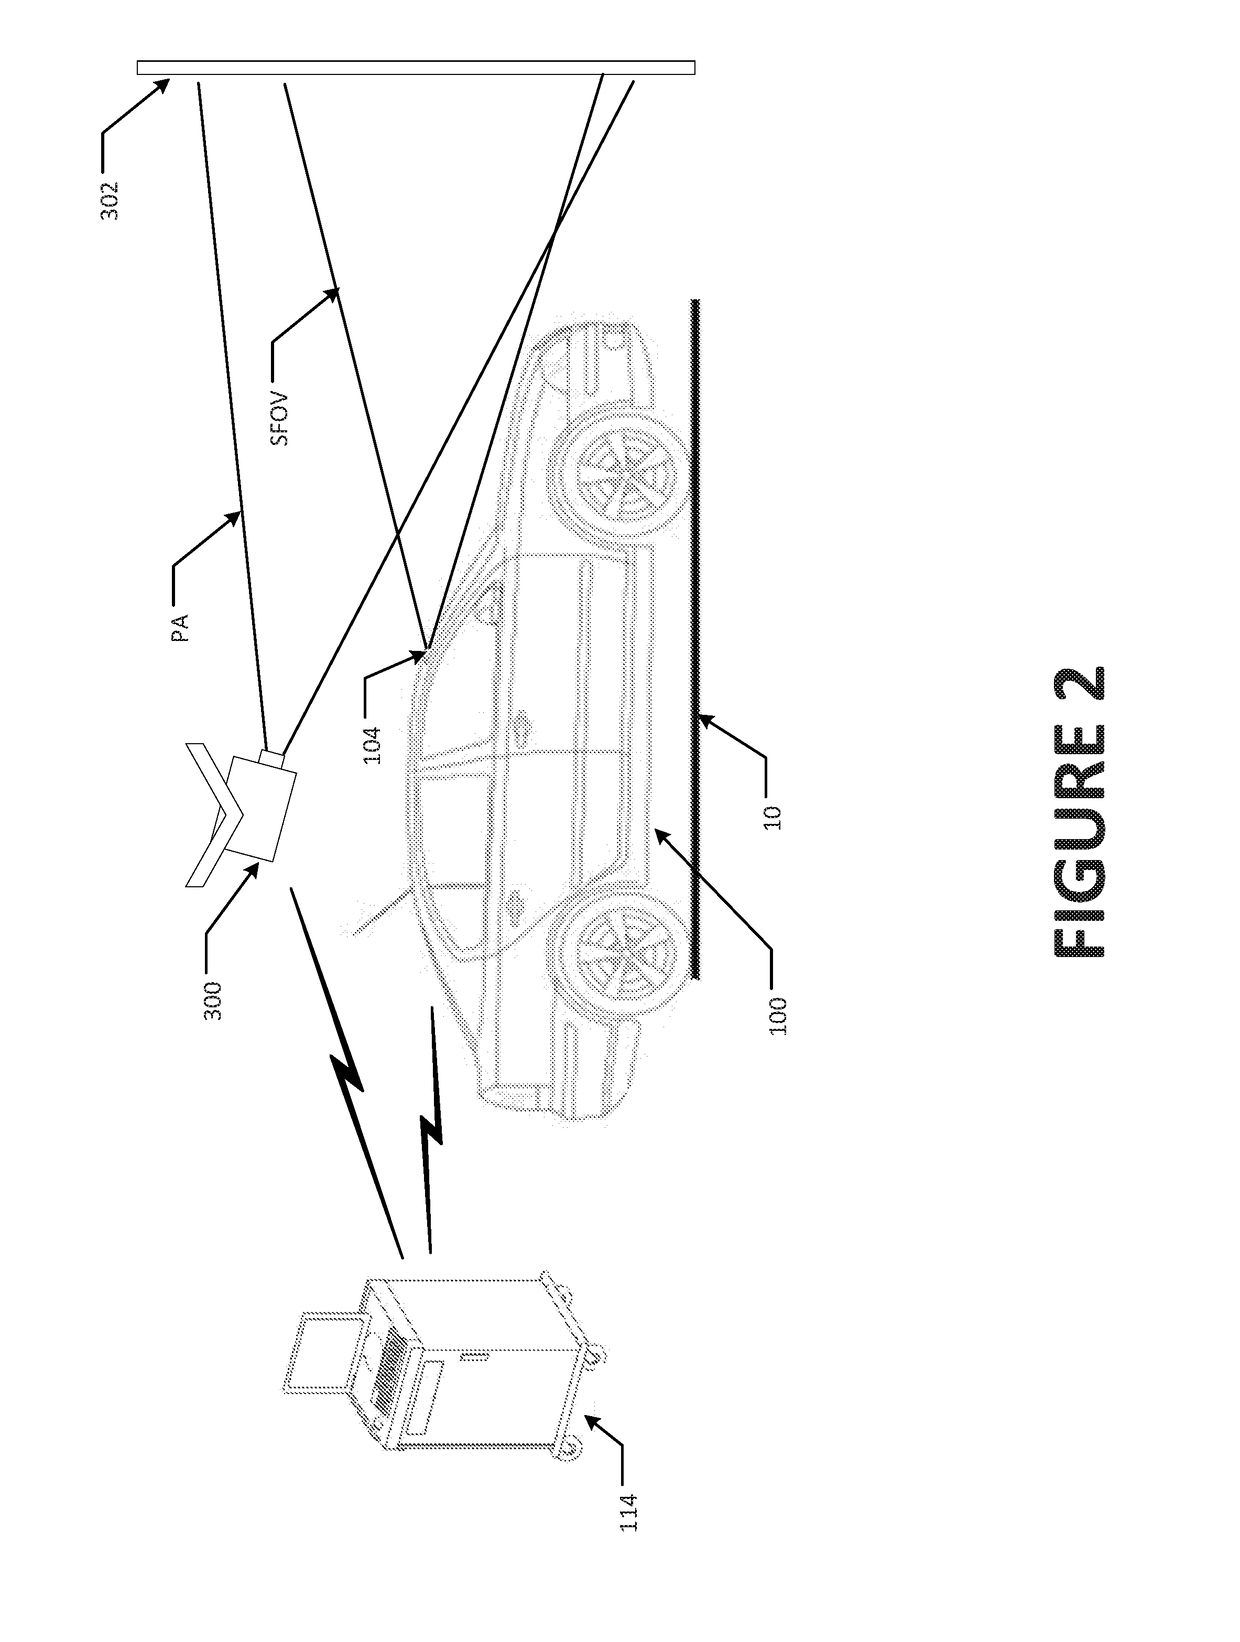 Method and Apparatus For Vehicle Inspection and Safety System Calibration Using Projected Images